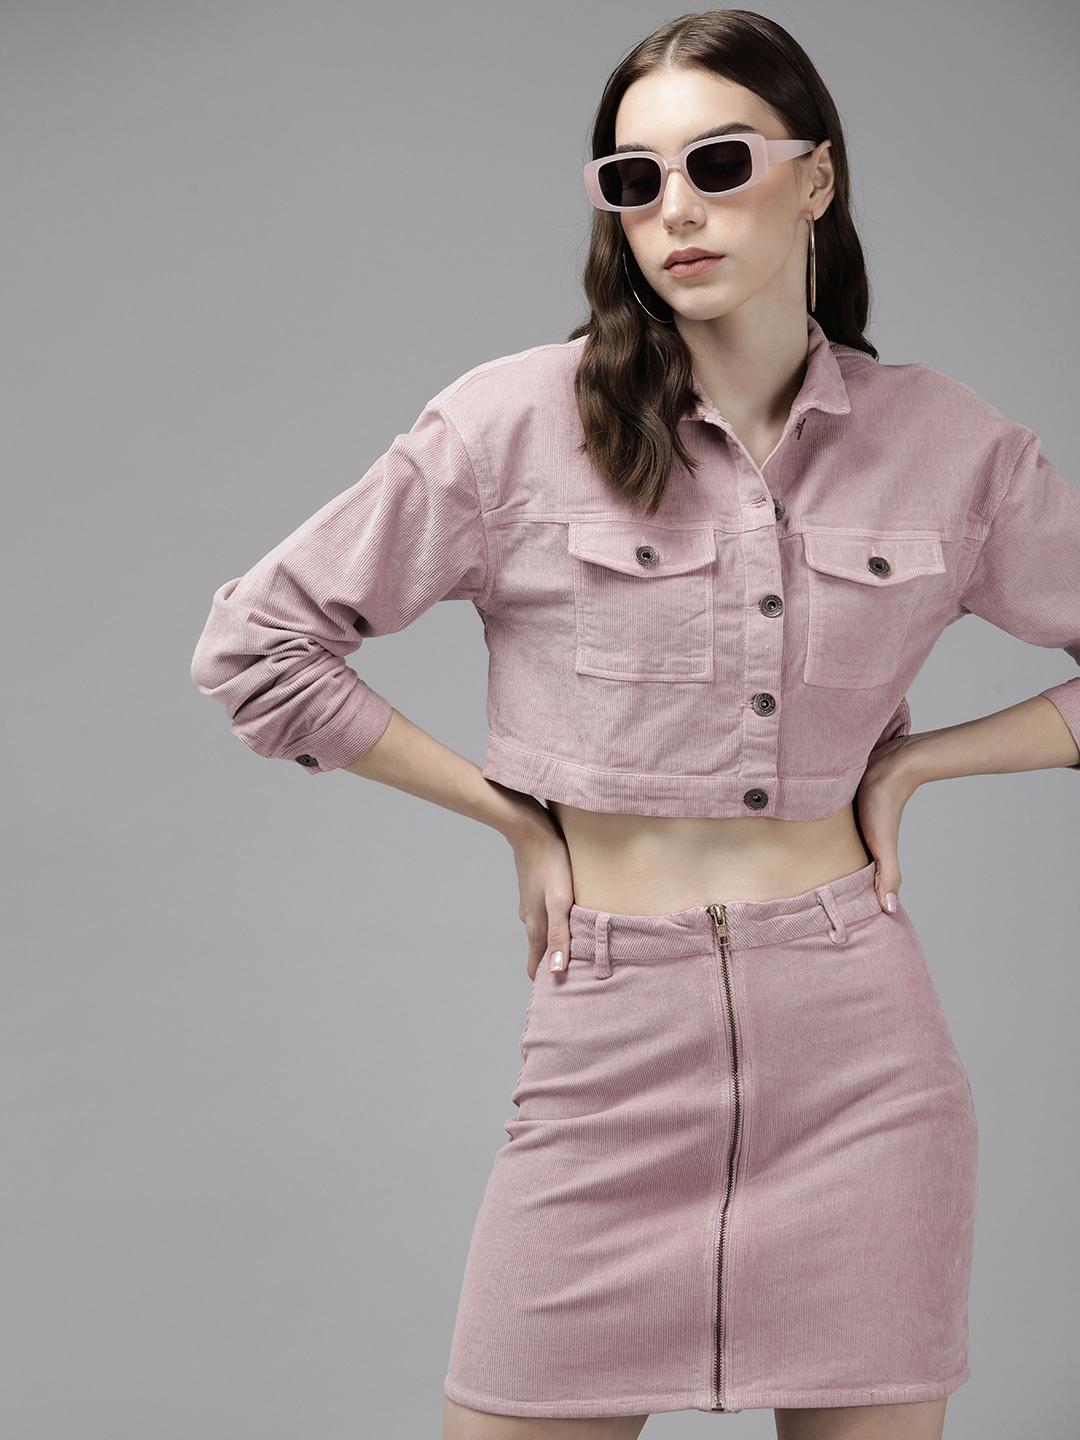 the roadster lifestyle co.  corduroy cropped shirt with skirt